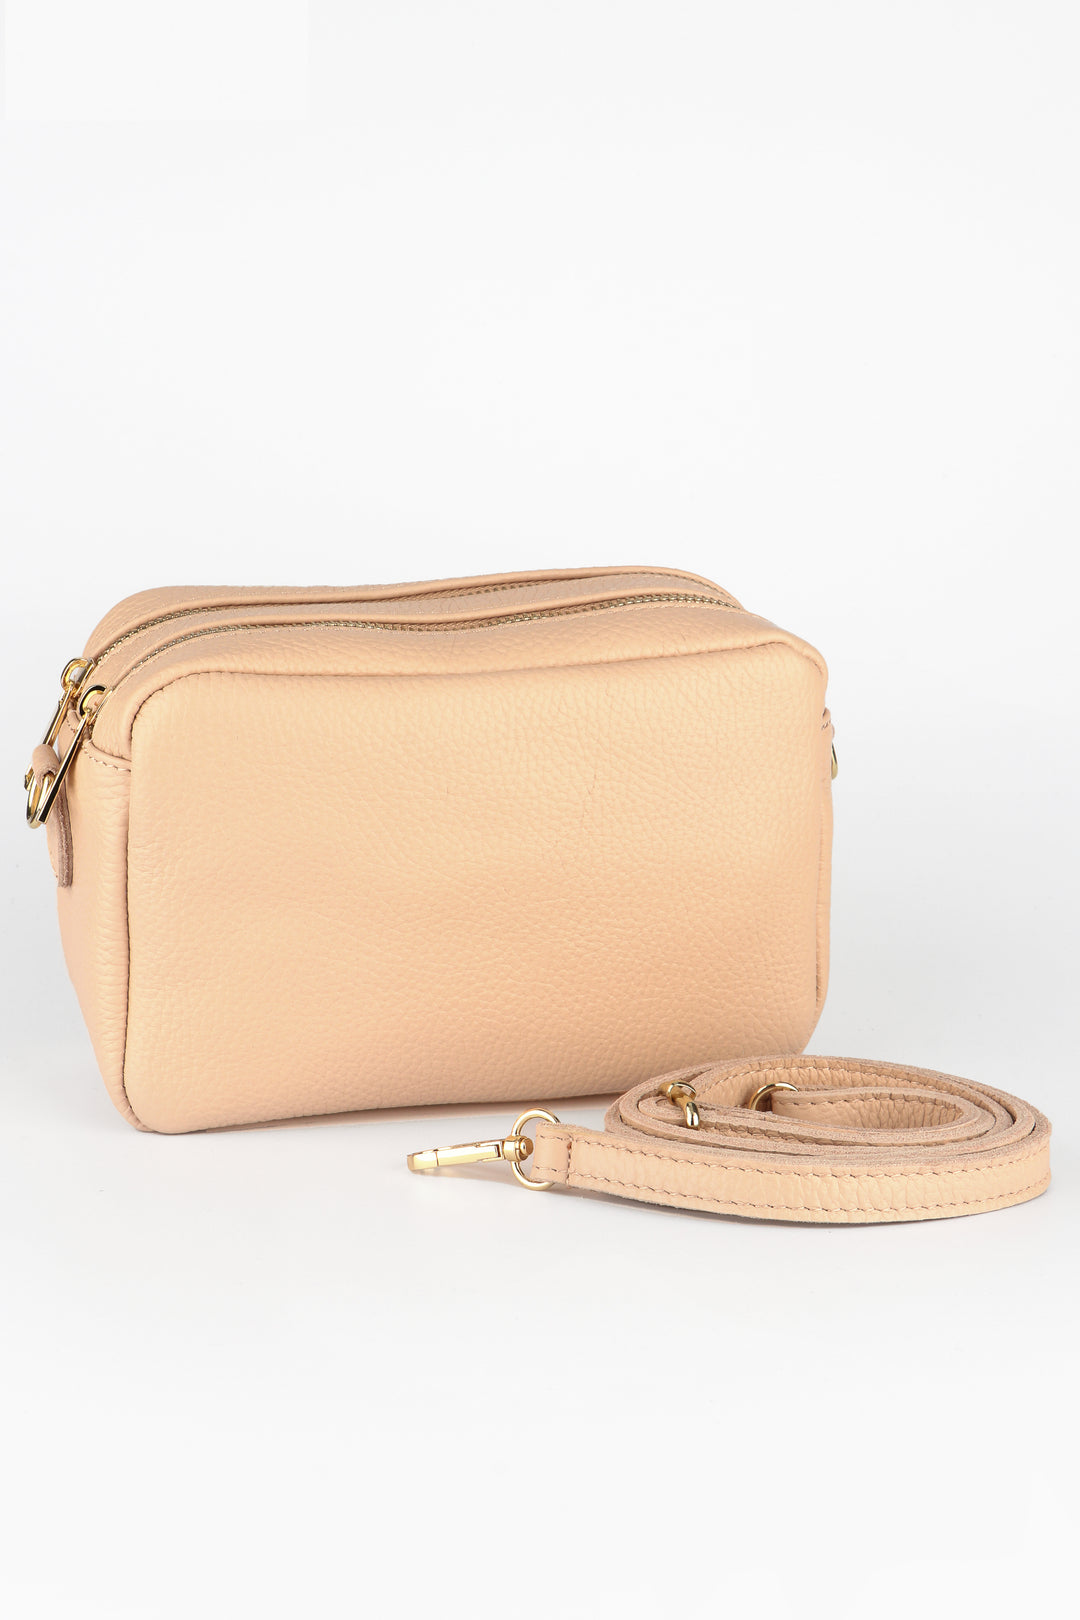 nude beige italian leather cross body camera bag with two zip closure compartments and a detachable matching bag strap